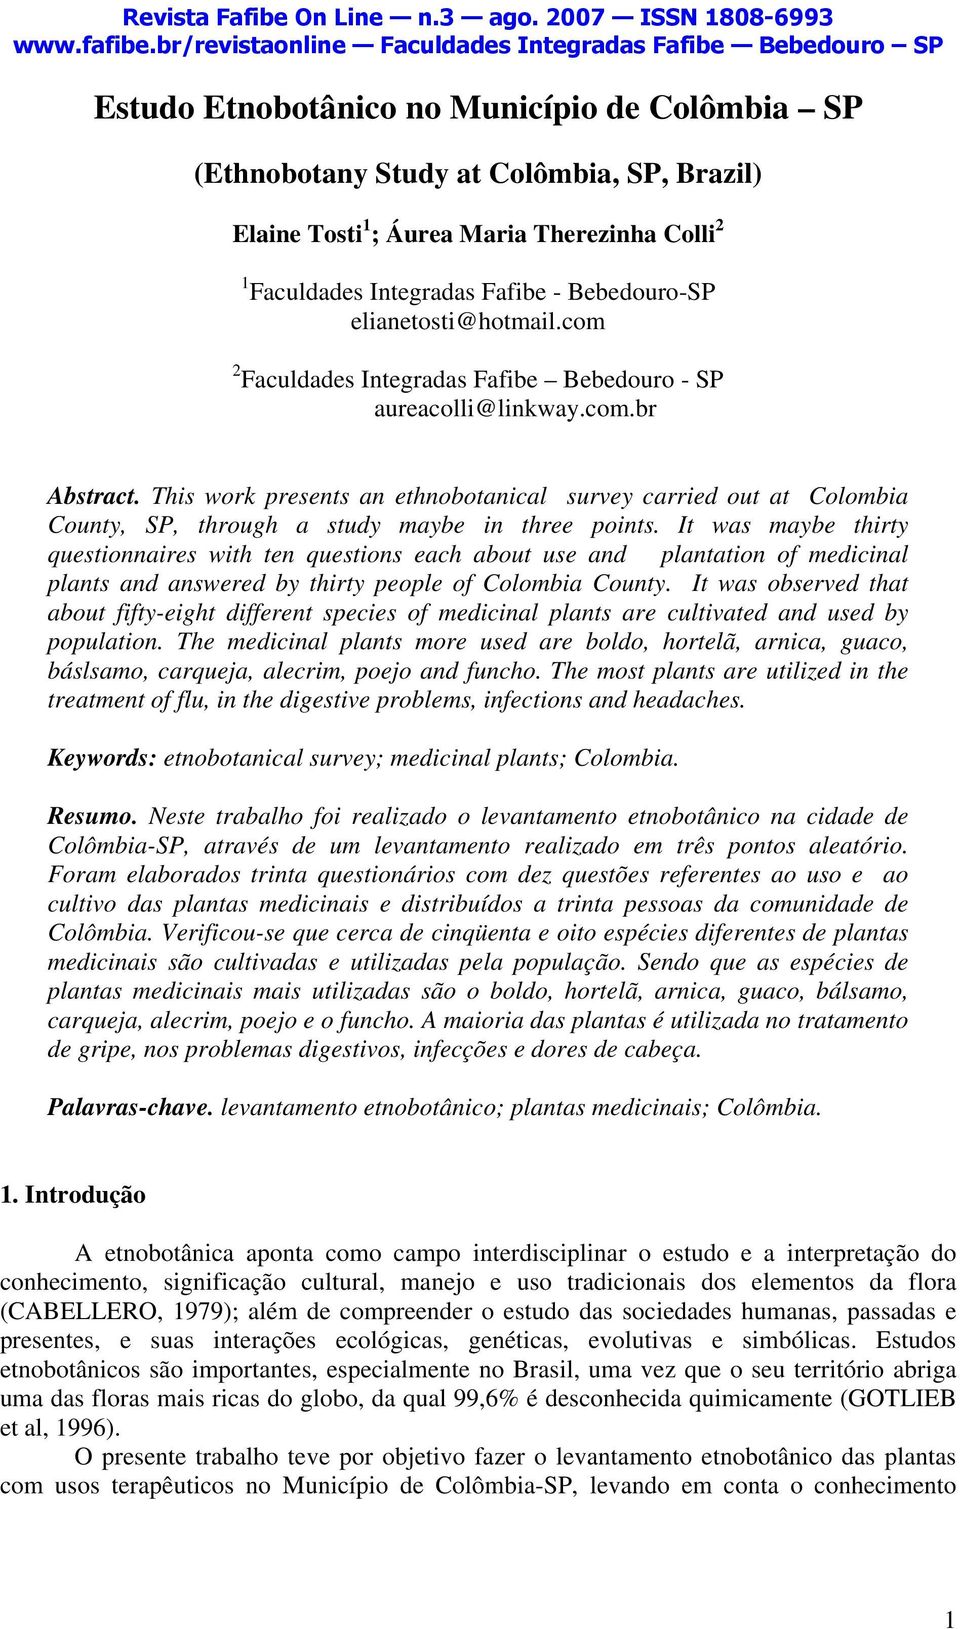 This work presents an ethnobotanical survey carried out at Colombia County, SP, through a study maybe in three points.